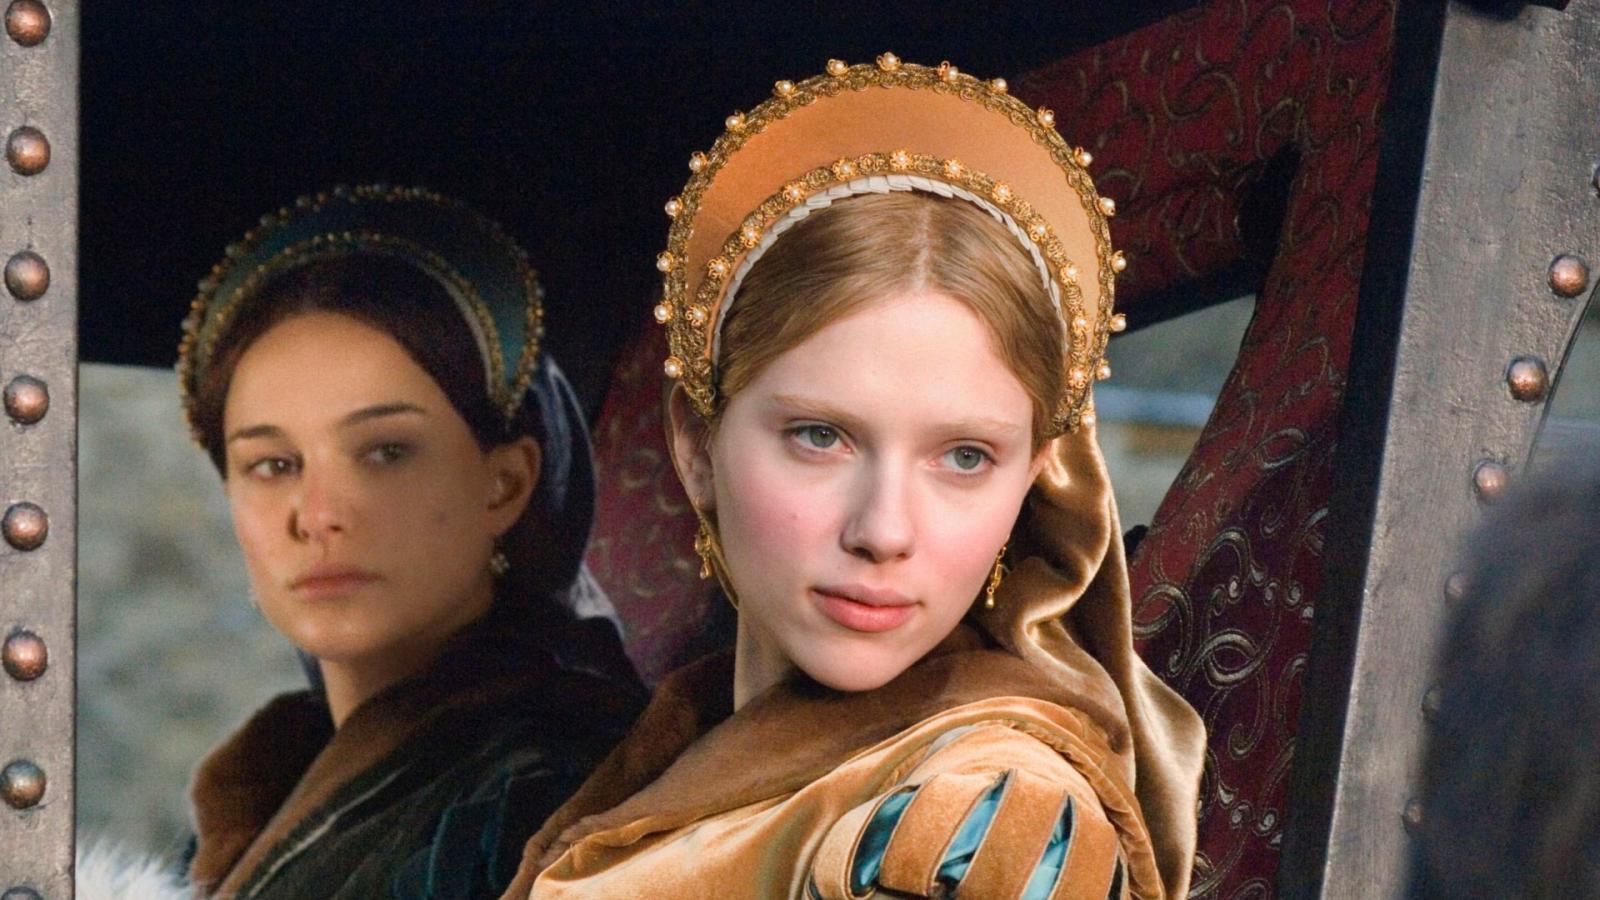 12 Historical Movies Where They Clearly Didn't Do the Research - image 12